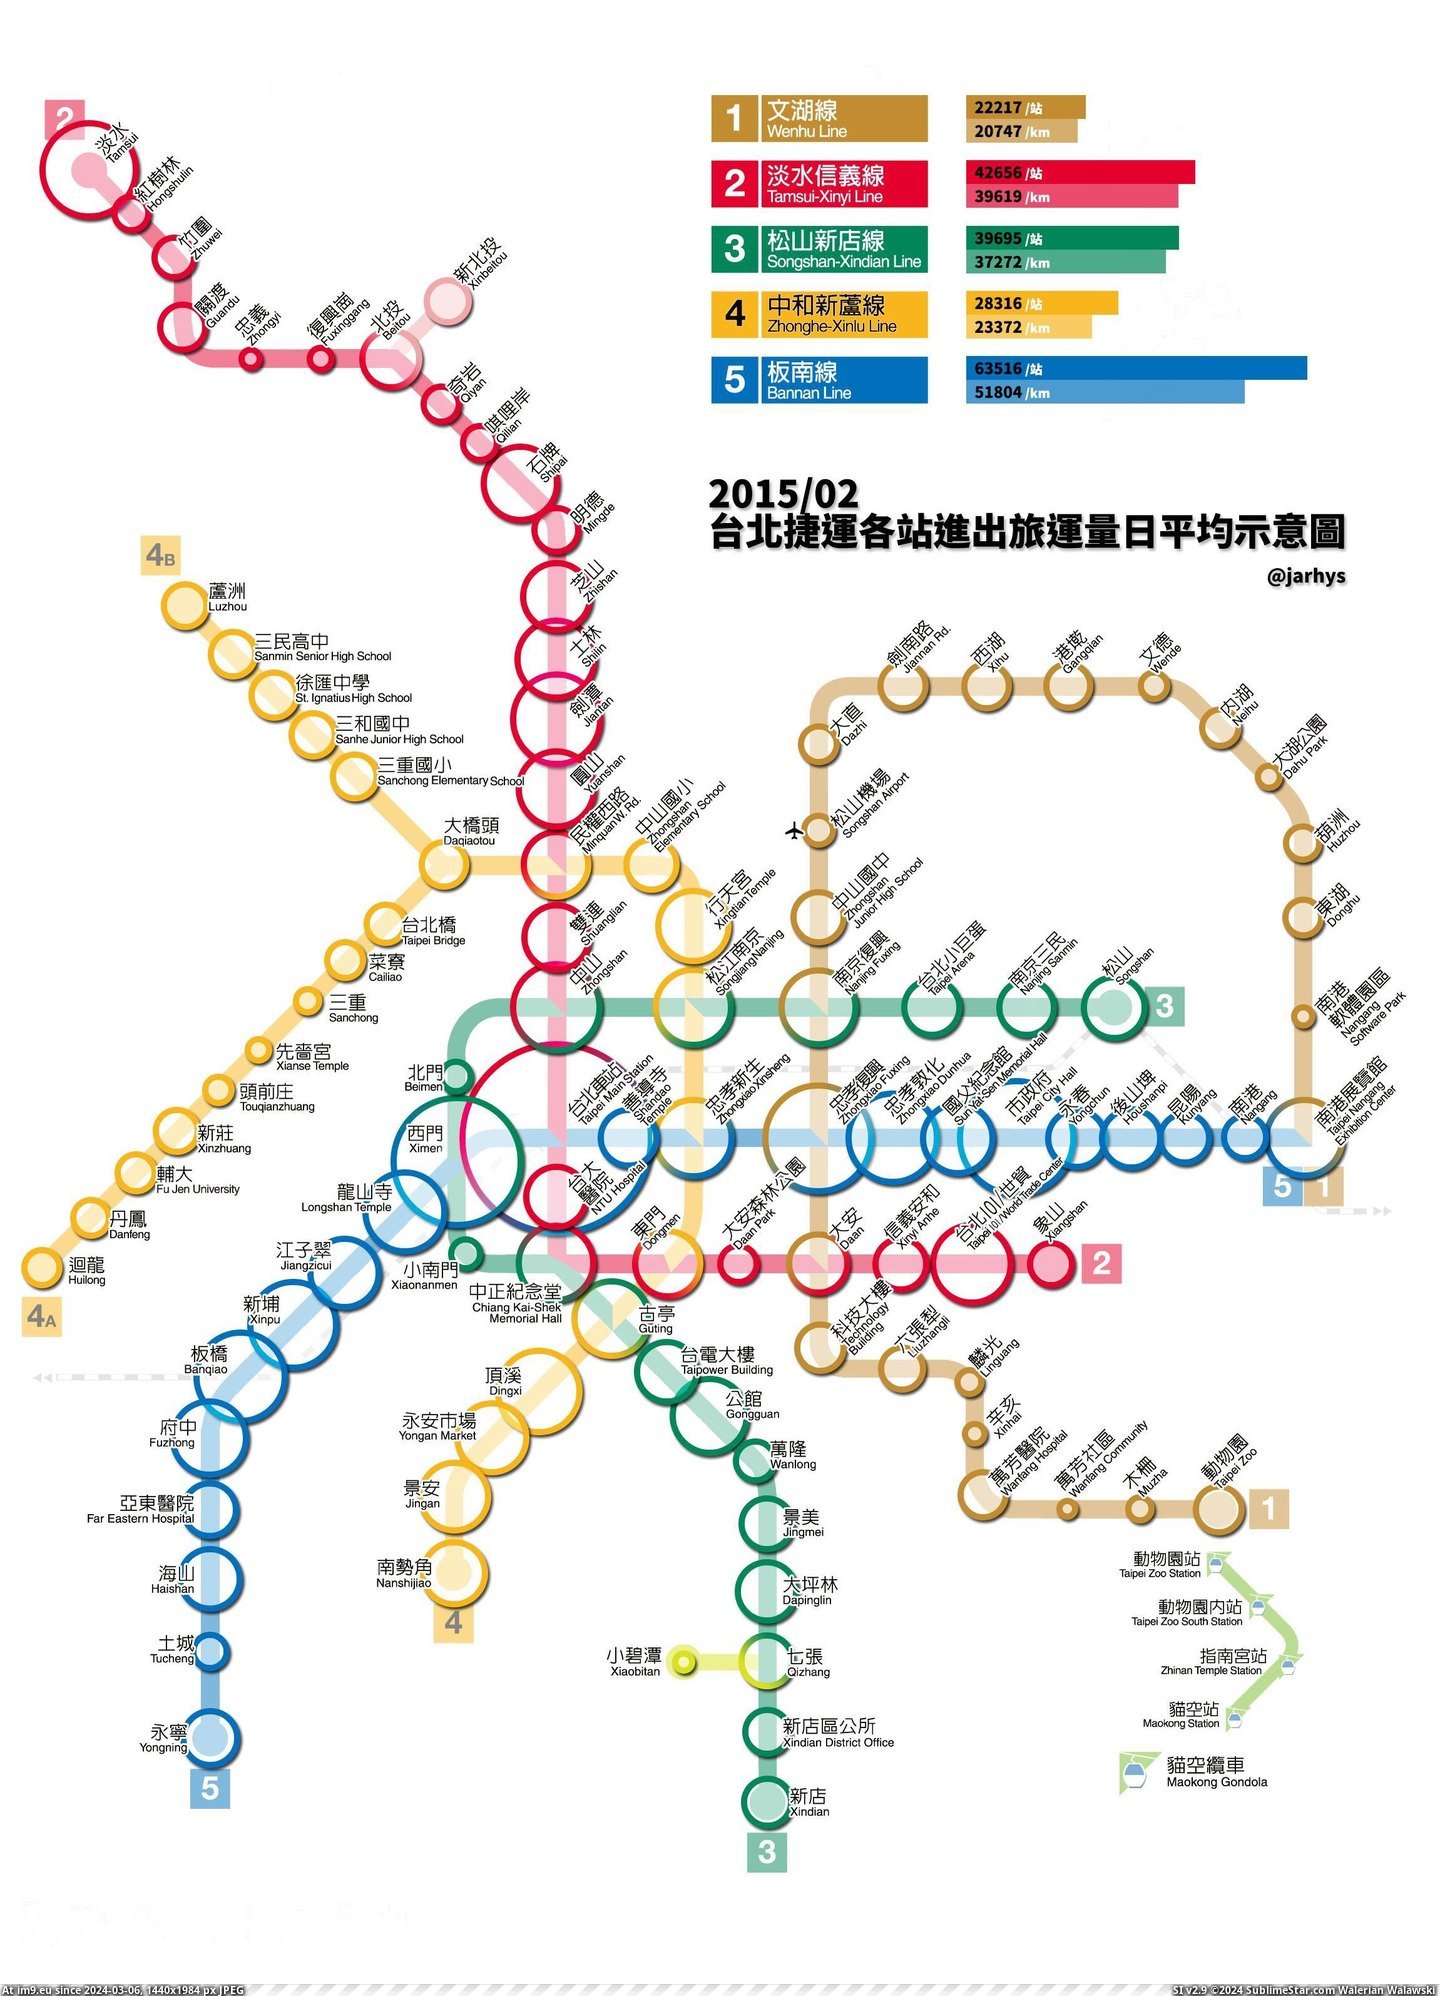 #Size #Relative #Gates #Numbers #Entering #Terms #Taipei #Passenger #Taiwan #Feb #Stations [Mapporn] Relative size of all Taipei MRT stations, in terms of passenger numbers entering and exiting gates, Feb 2015 [taiwan]  Pic. (Image of album My r/MAPS favs))